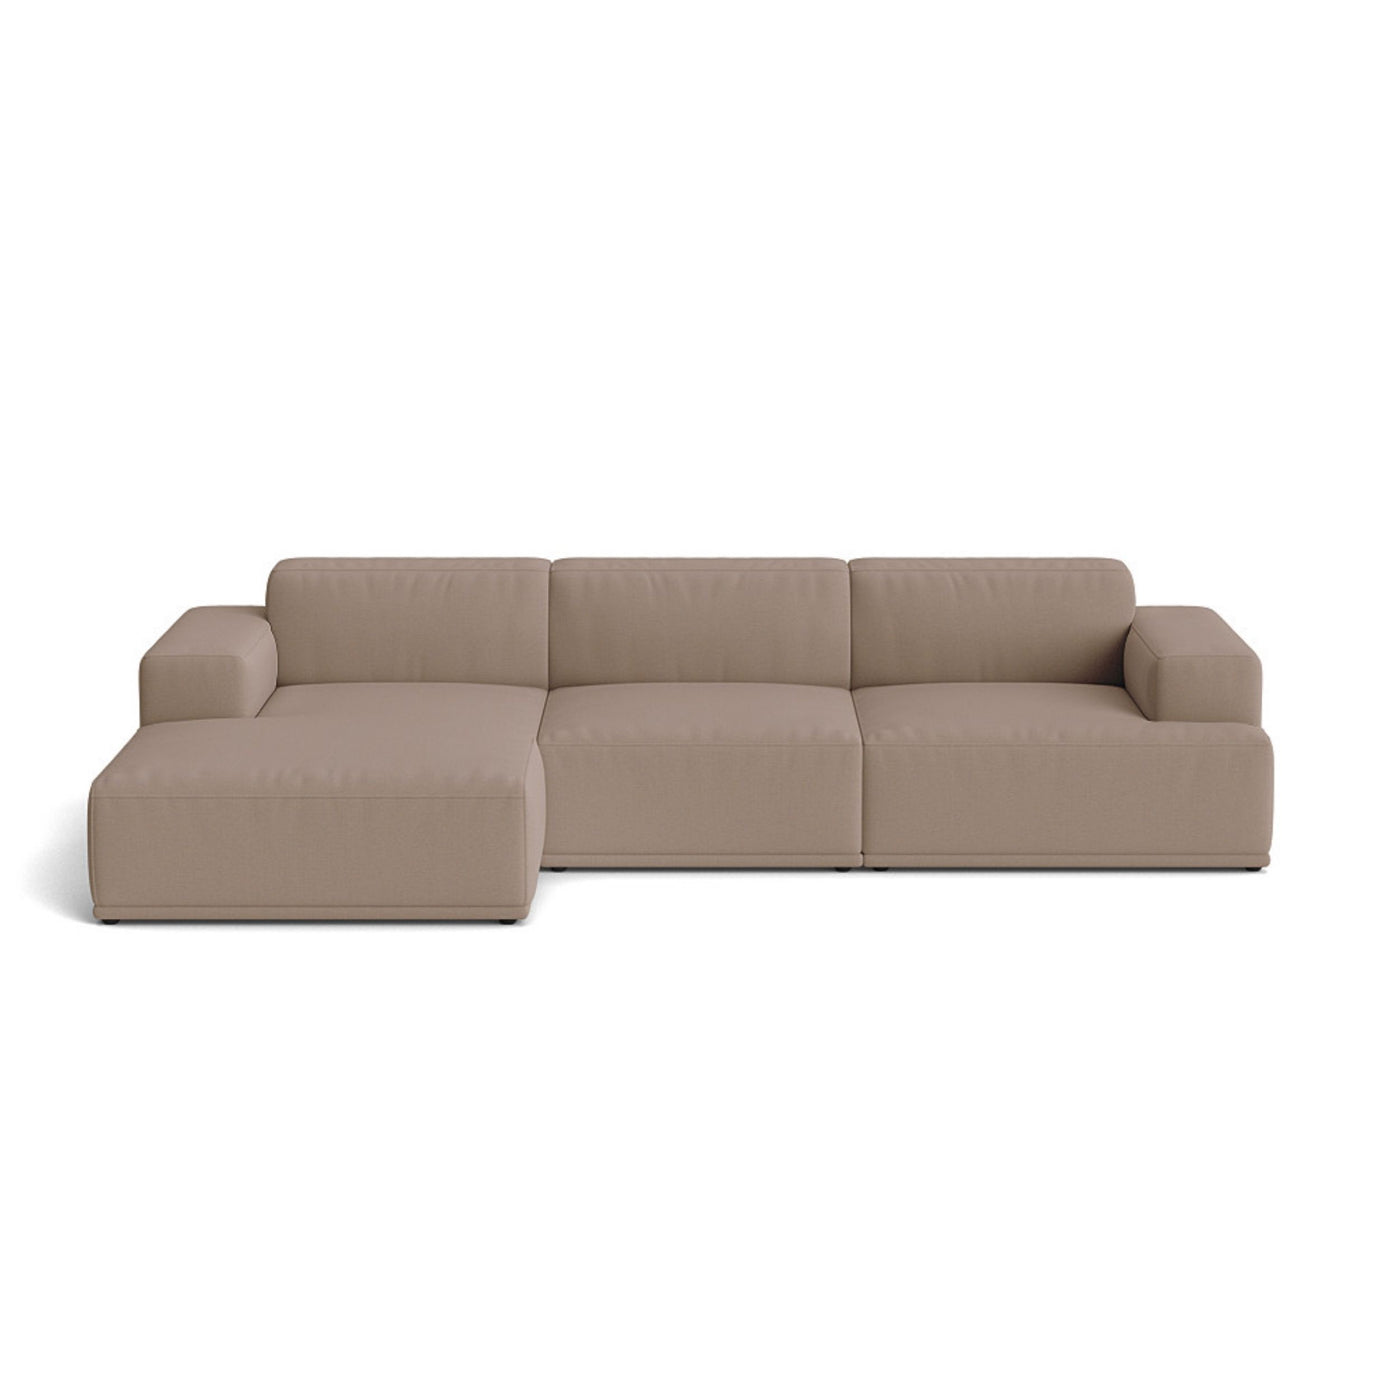 Muuto Connect Soft Modular 3 Seater Sofa, configuration 3. Made-to-order from someday designs. #colour_steelcut-trio-426